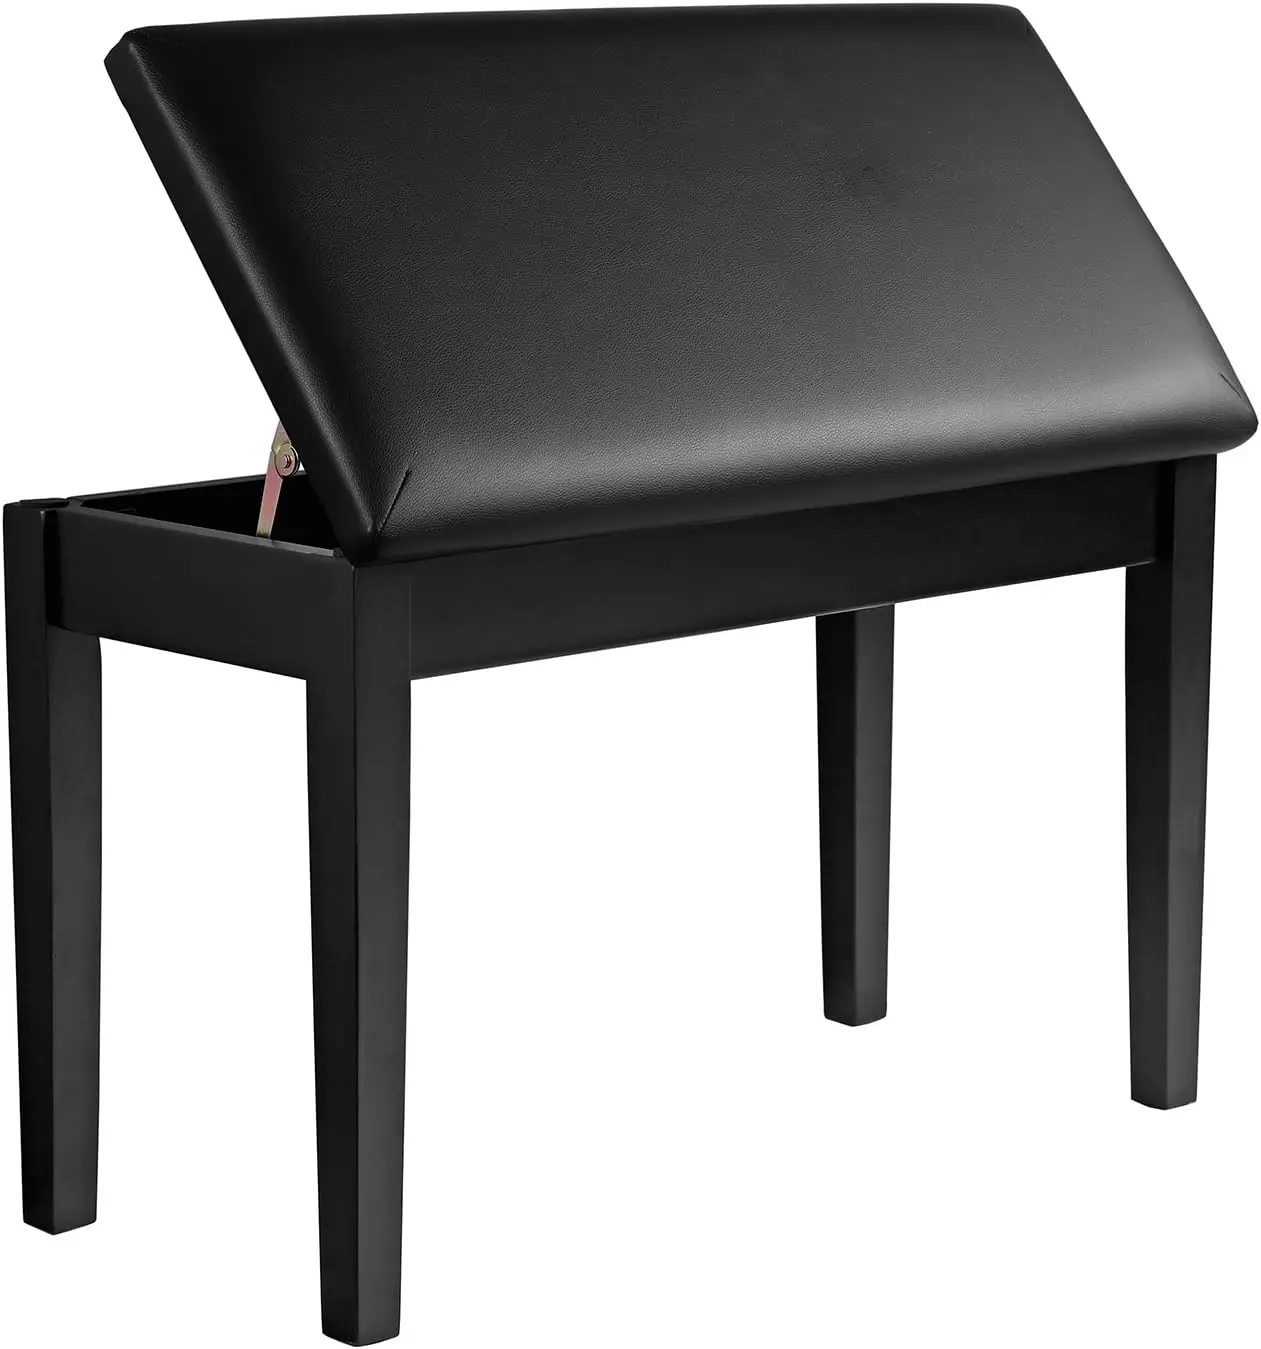 Duet Piano Bench with Padded Cushion and Music Storage Compartment, Piano Chair Seat, Black ULPB75BK